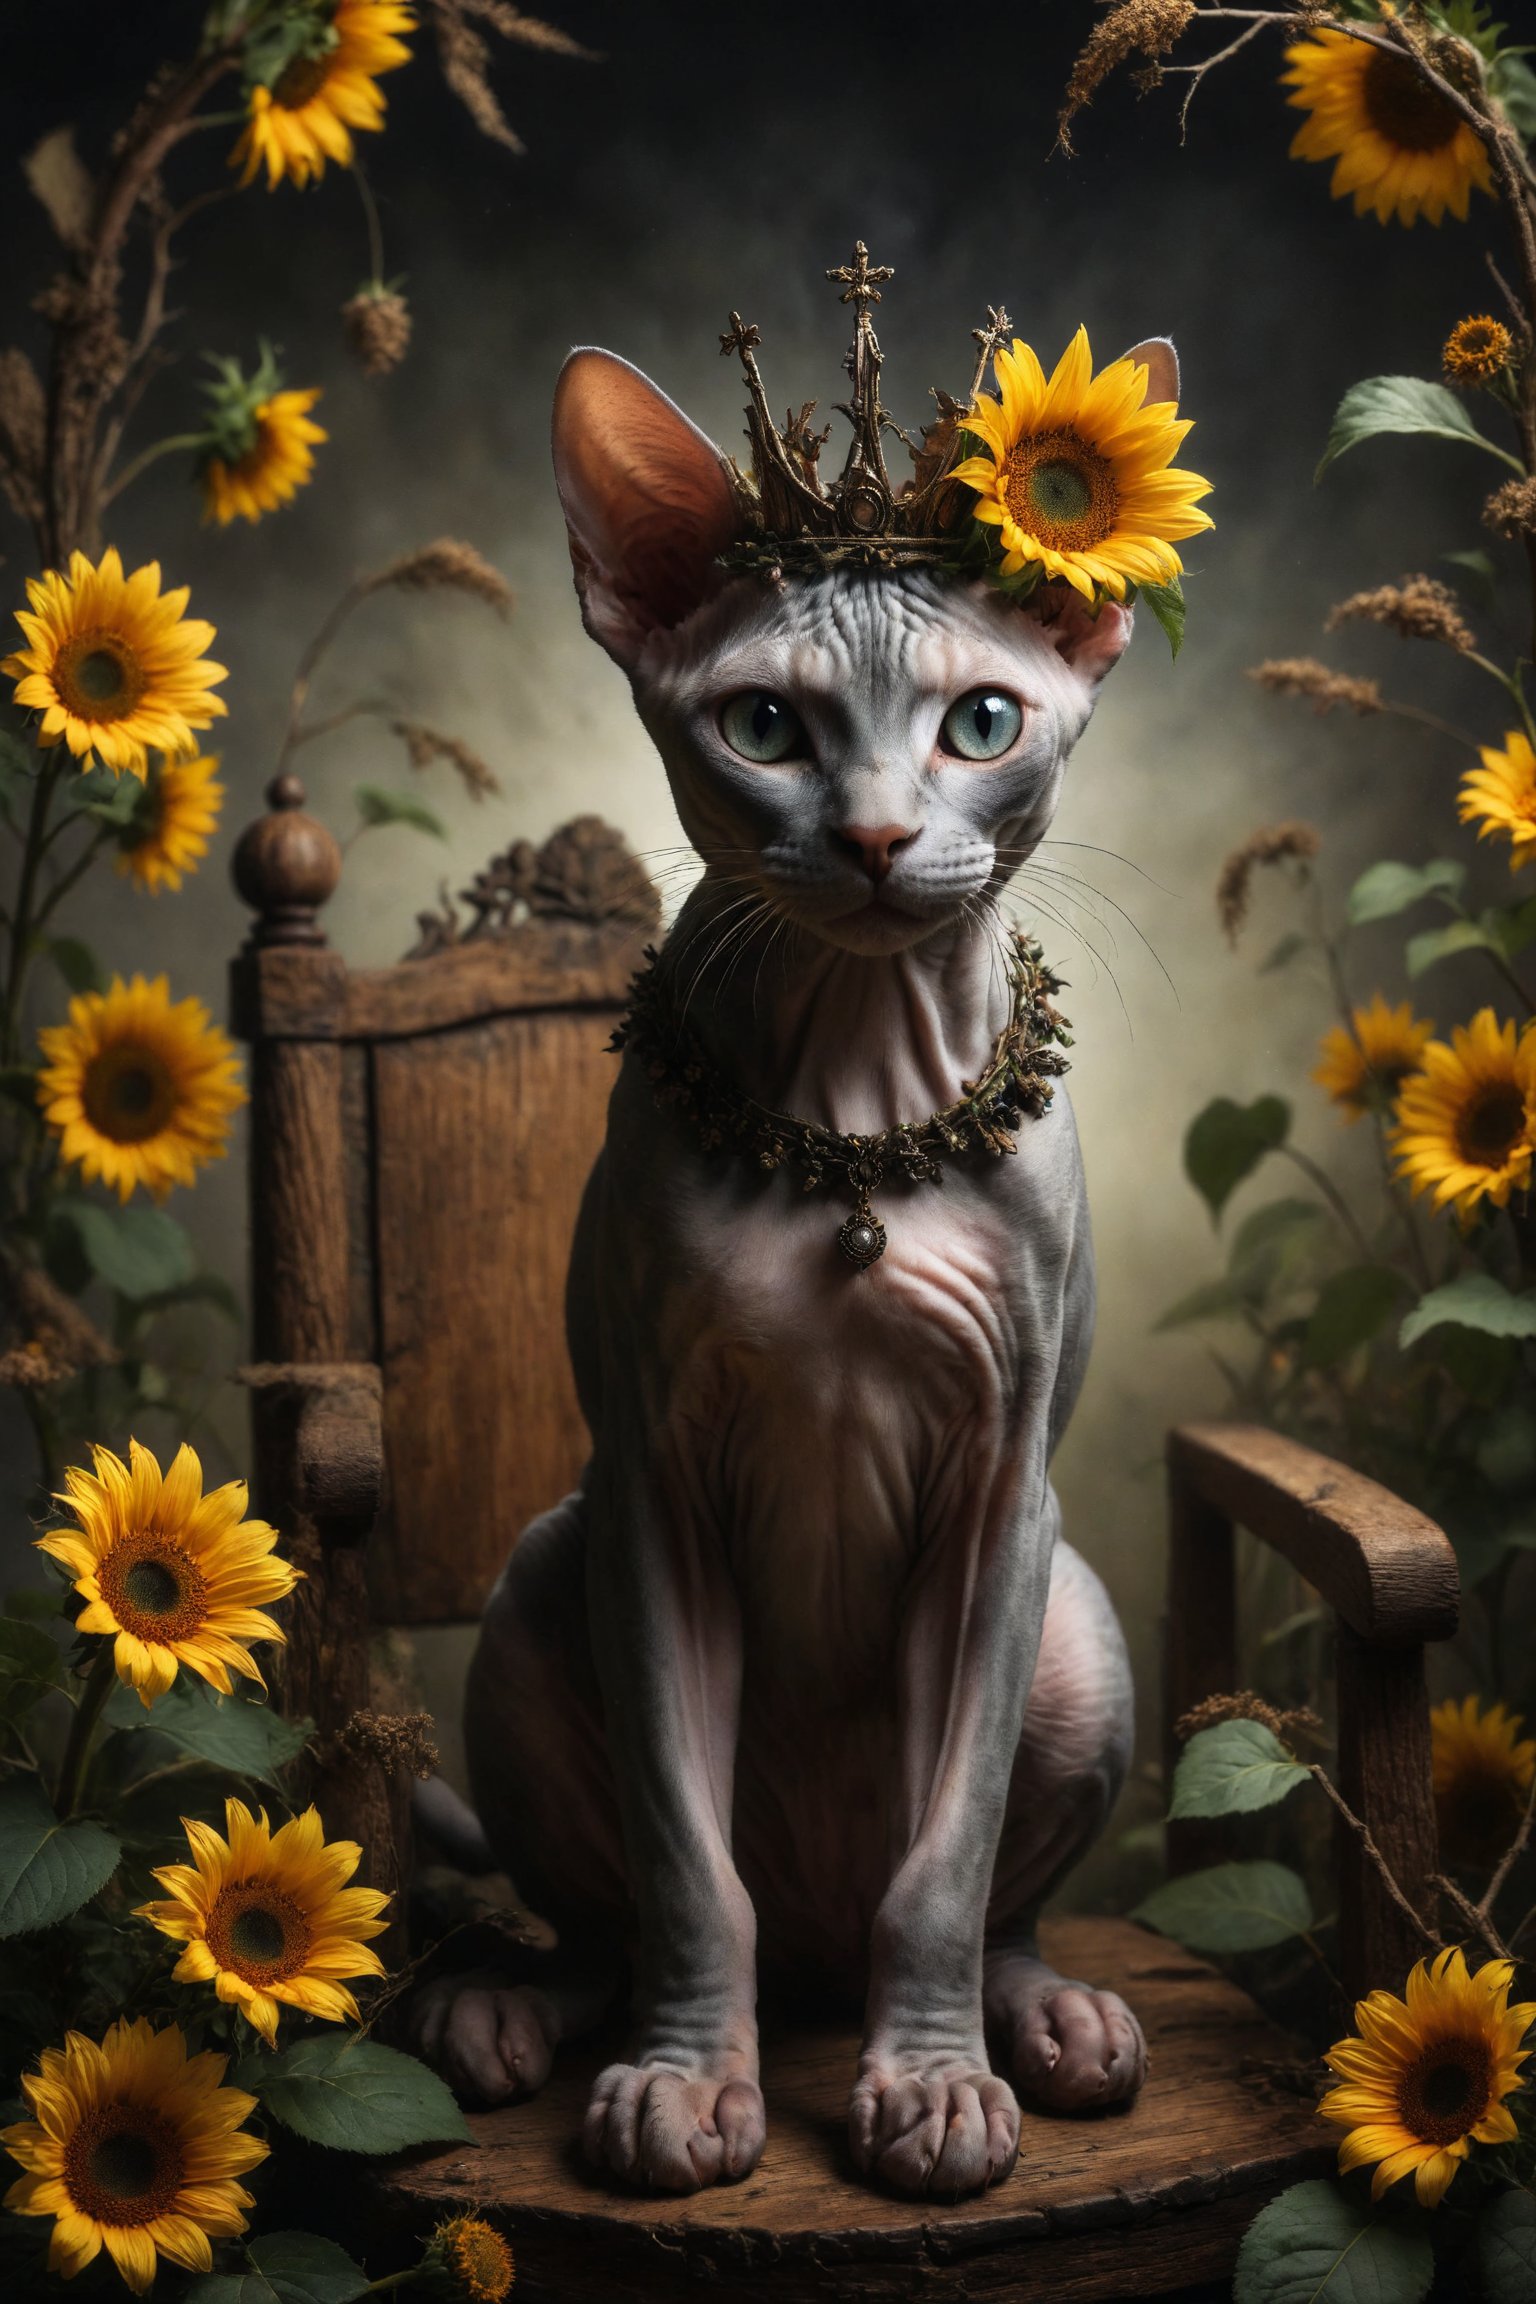 Create an image of a female Sphynx cat with a beautiful crown on her head, and holding a wooden branch in her hand, as if it were her symbol of power, on a throne made of wooden branches, adorned with sunflowers and canes and branches of wood. , with a black cat at her feet, symbolizing trust, independence and warmth.